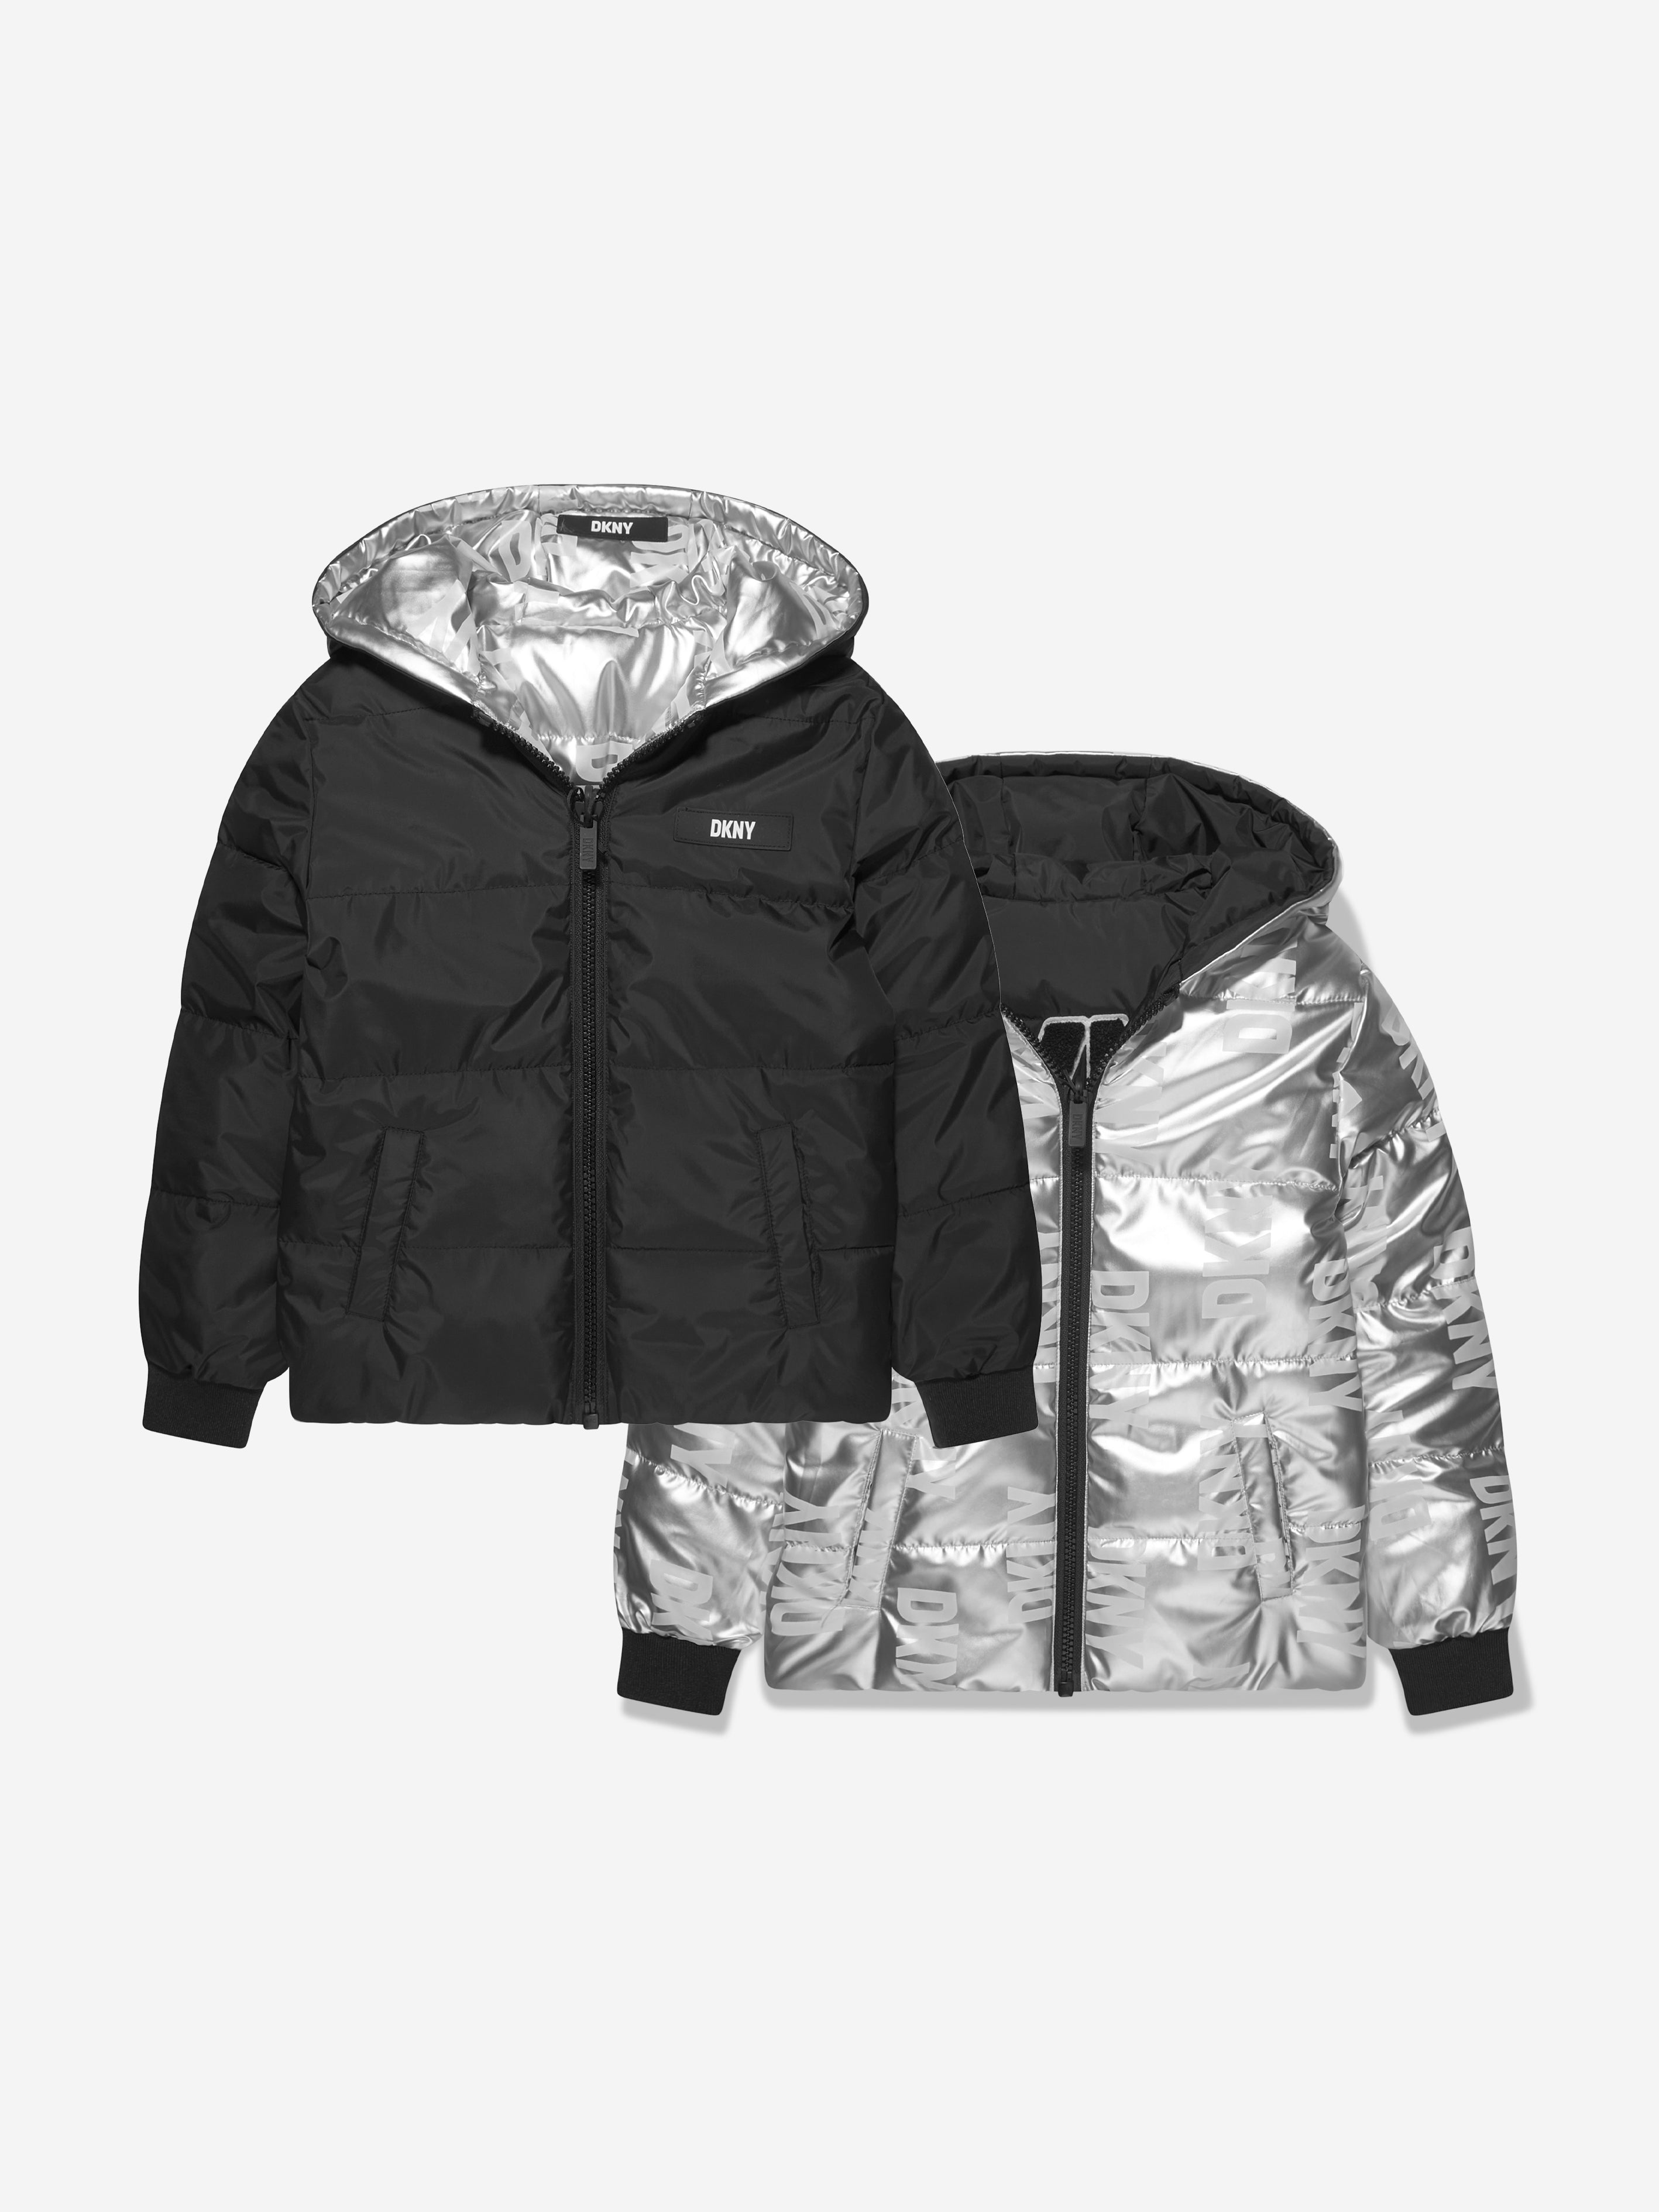  DKNY Girls' Jacket – Reversible Heavyweight Quilted